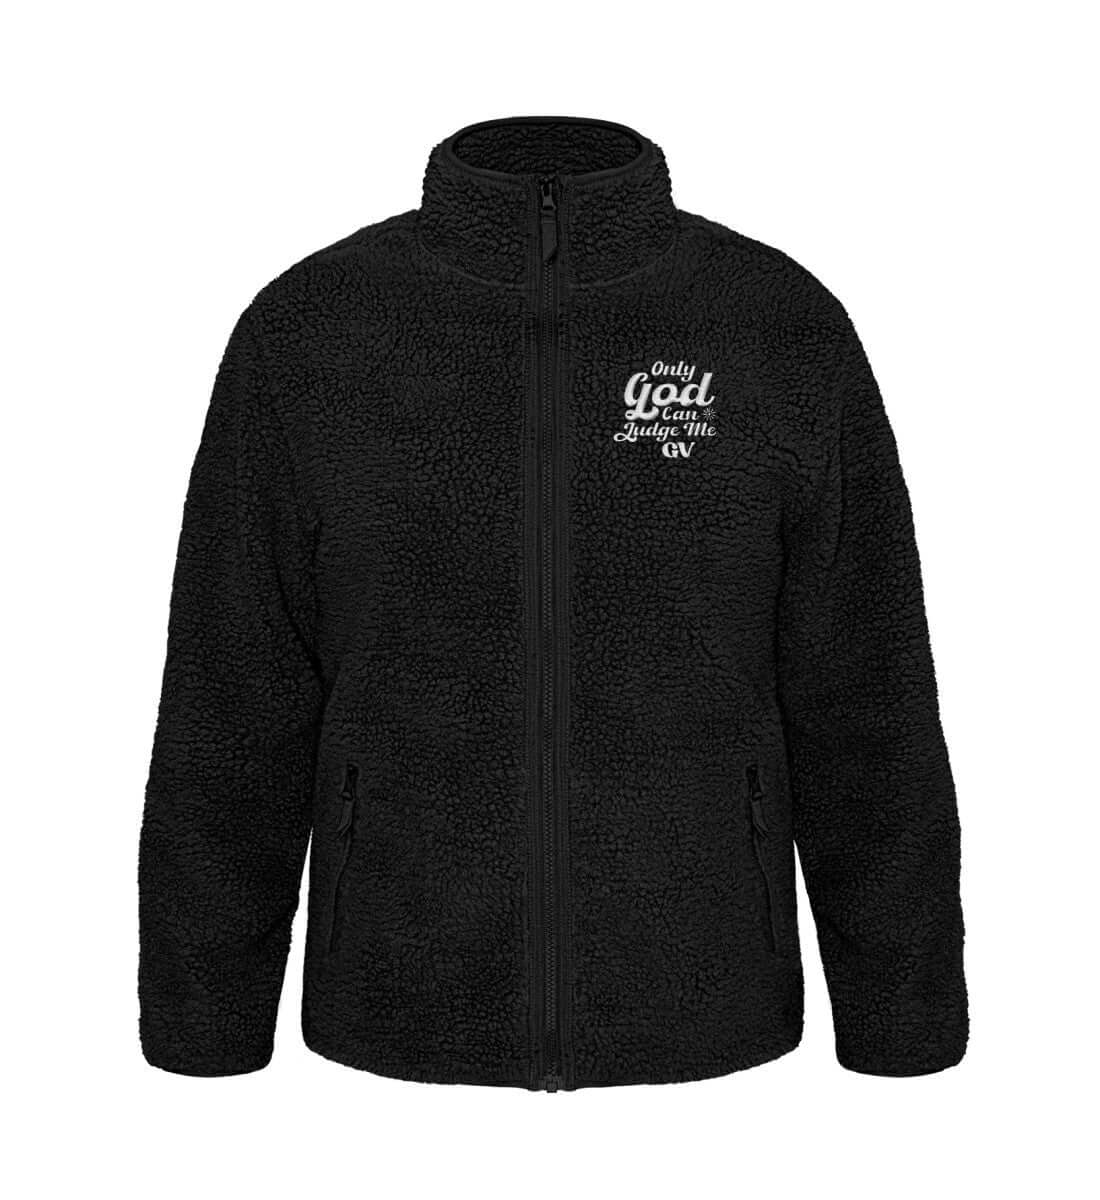 'ONLY GOD CAN JUDGE ME' SHERPA JACKET - GODVIBES